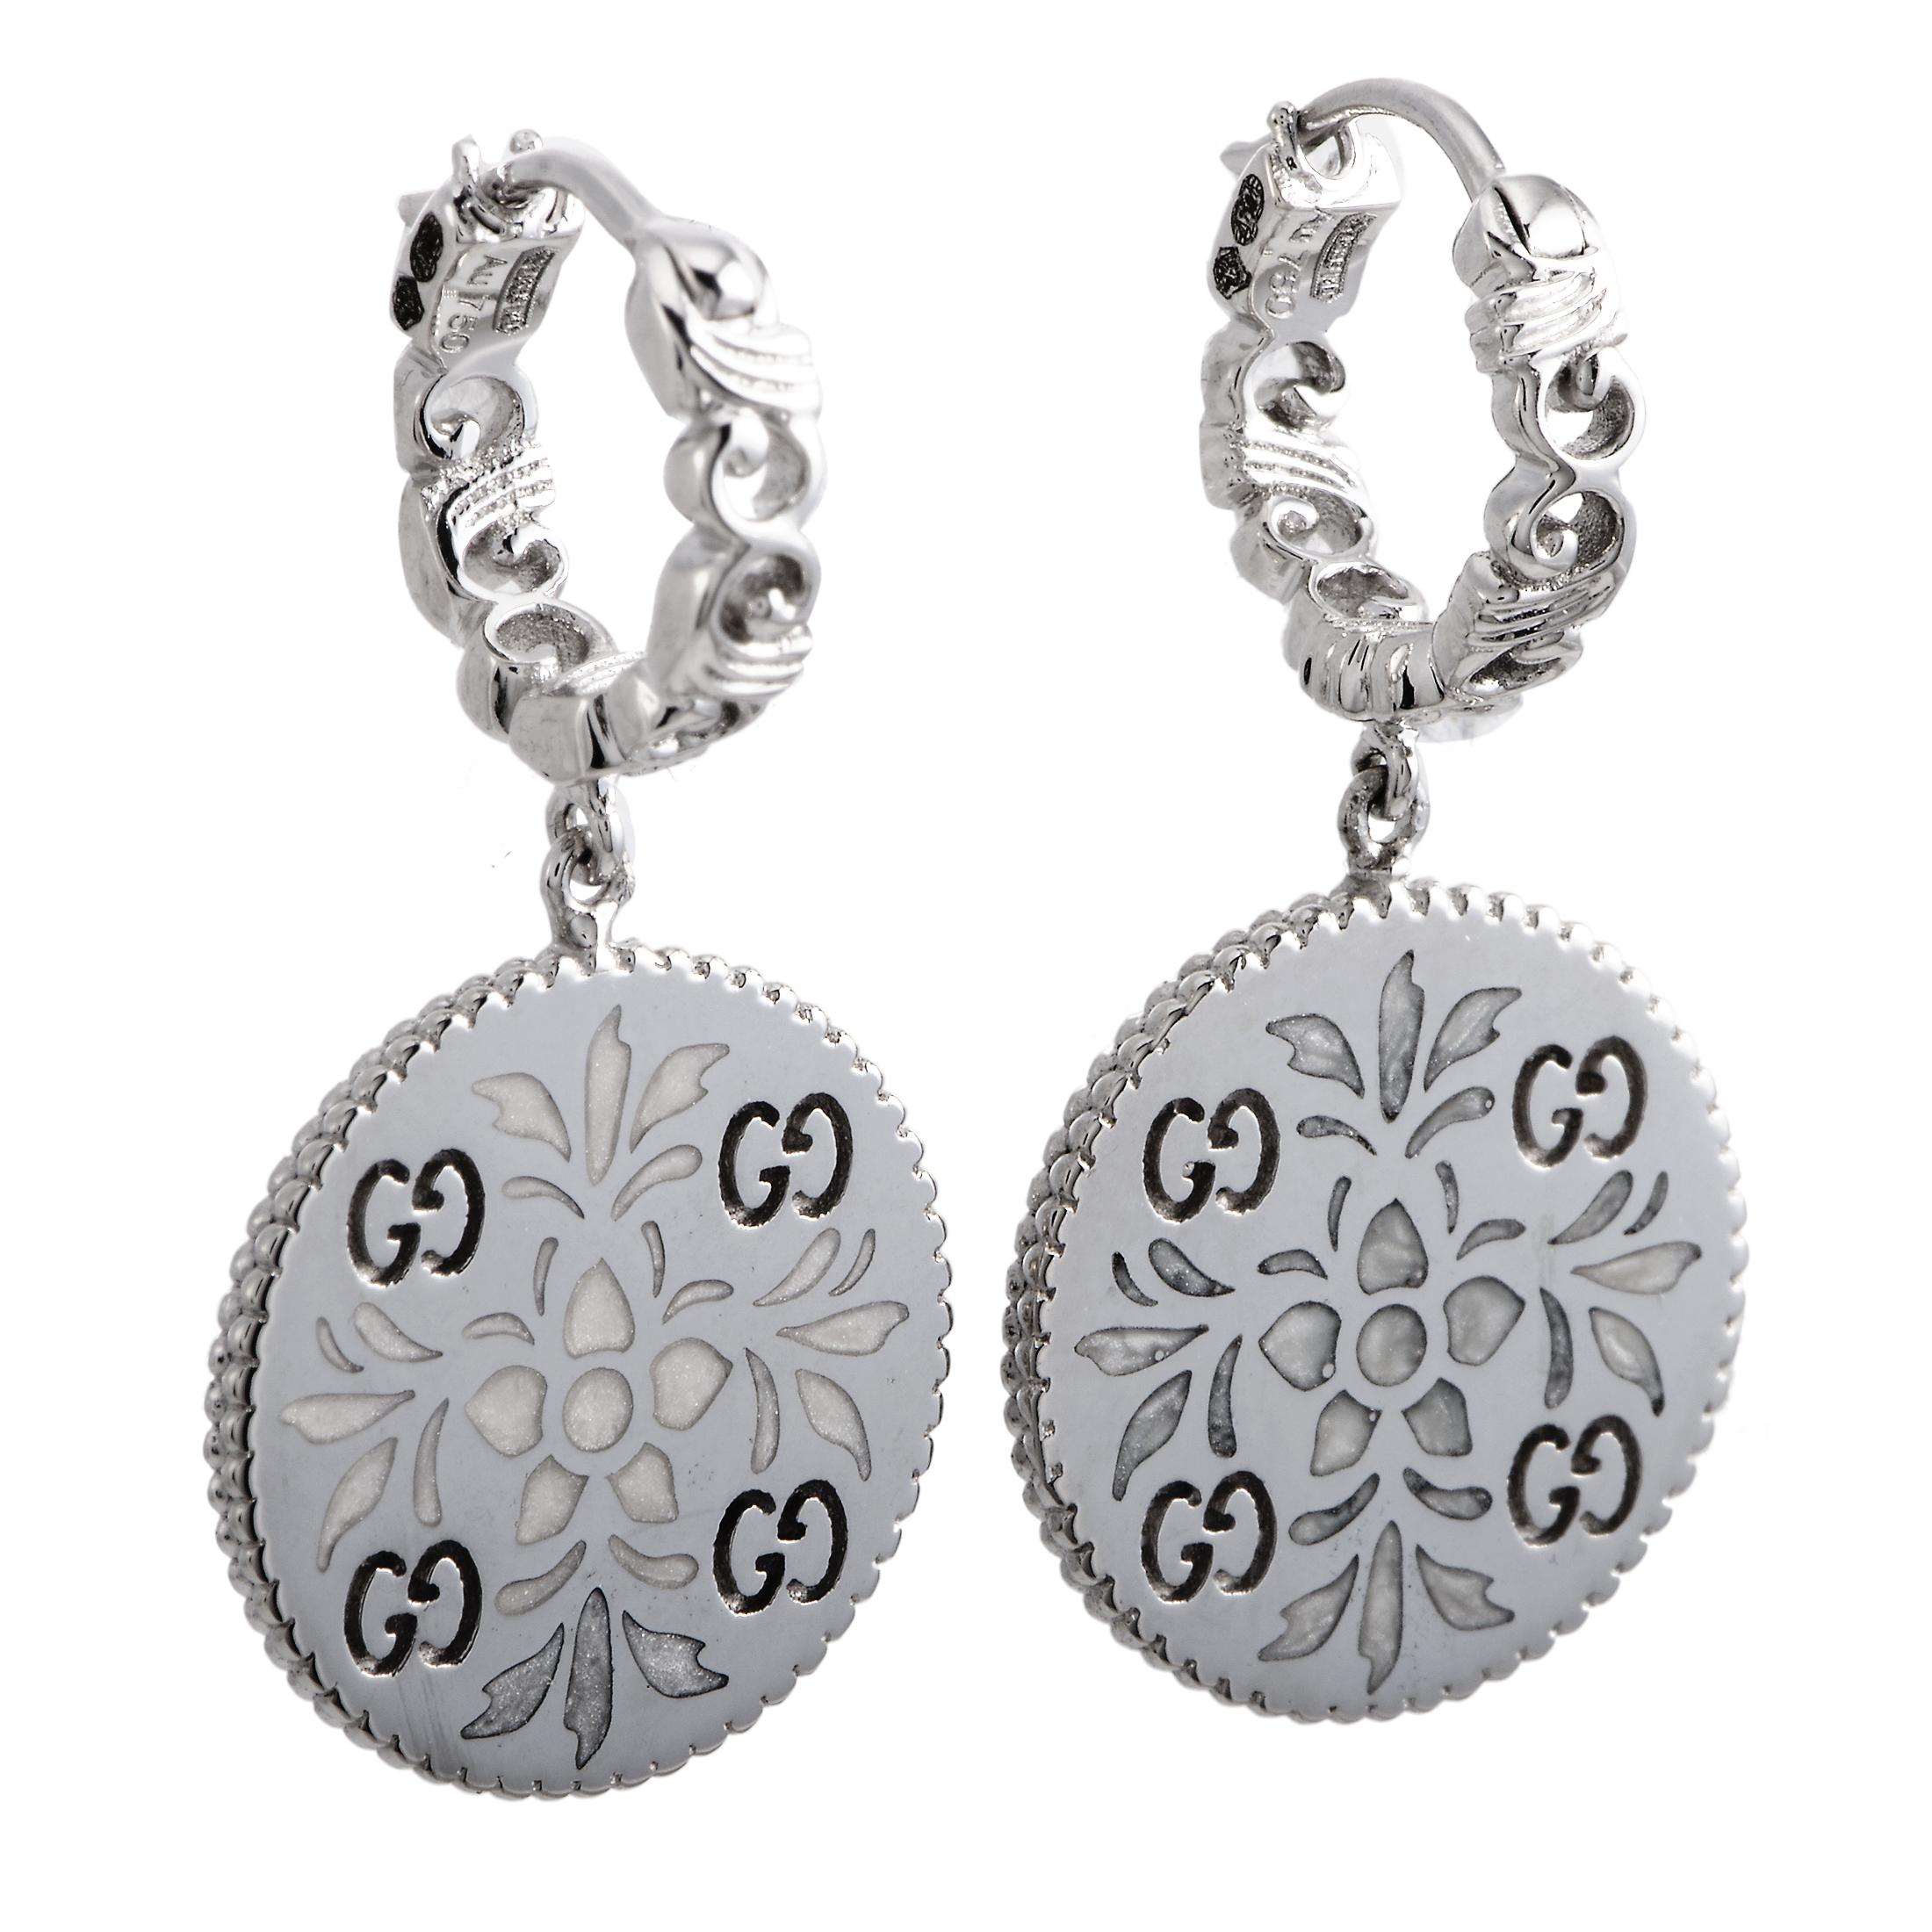 The Gucci “Icon Blooms” earrings are made out of 18K white gold and enamel and each of the two weighs 4 grams. The earrings measure 1” in length and 0.50” in width.